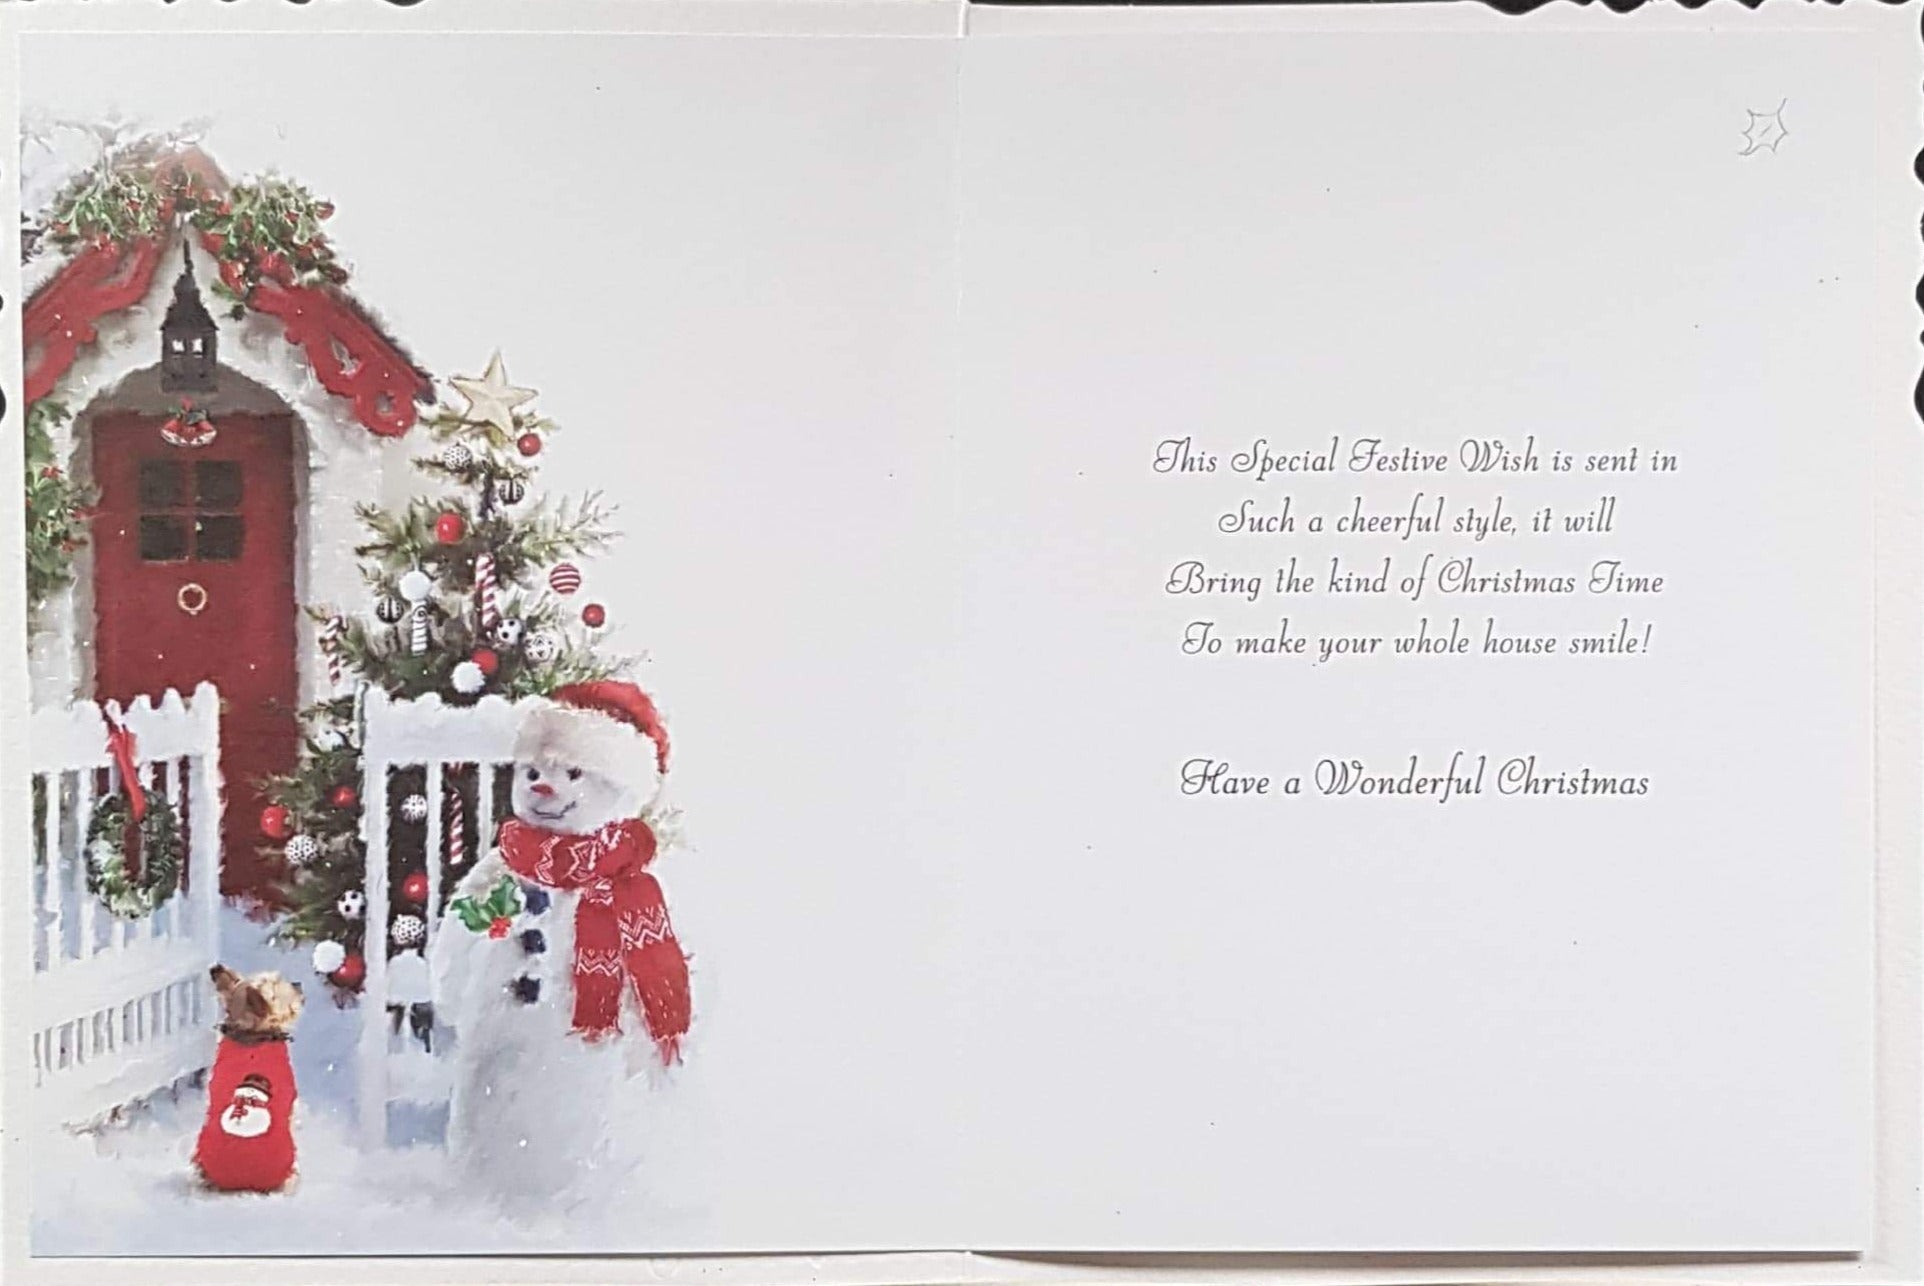 From Our House To Your House Christmas Card - Merry Christmas & A Dog and Snowman & Red Door